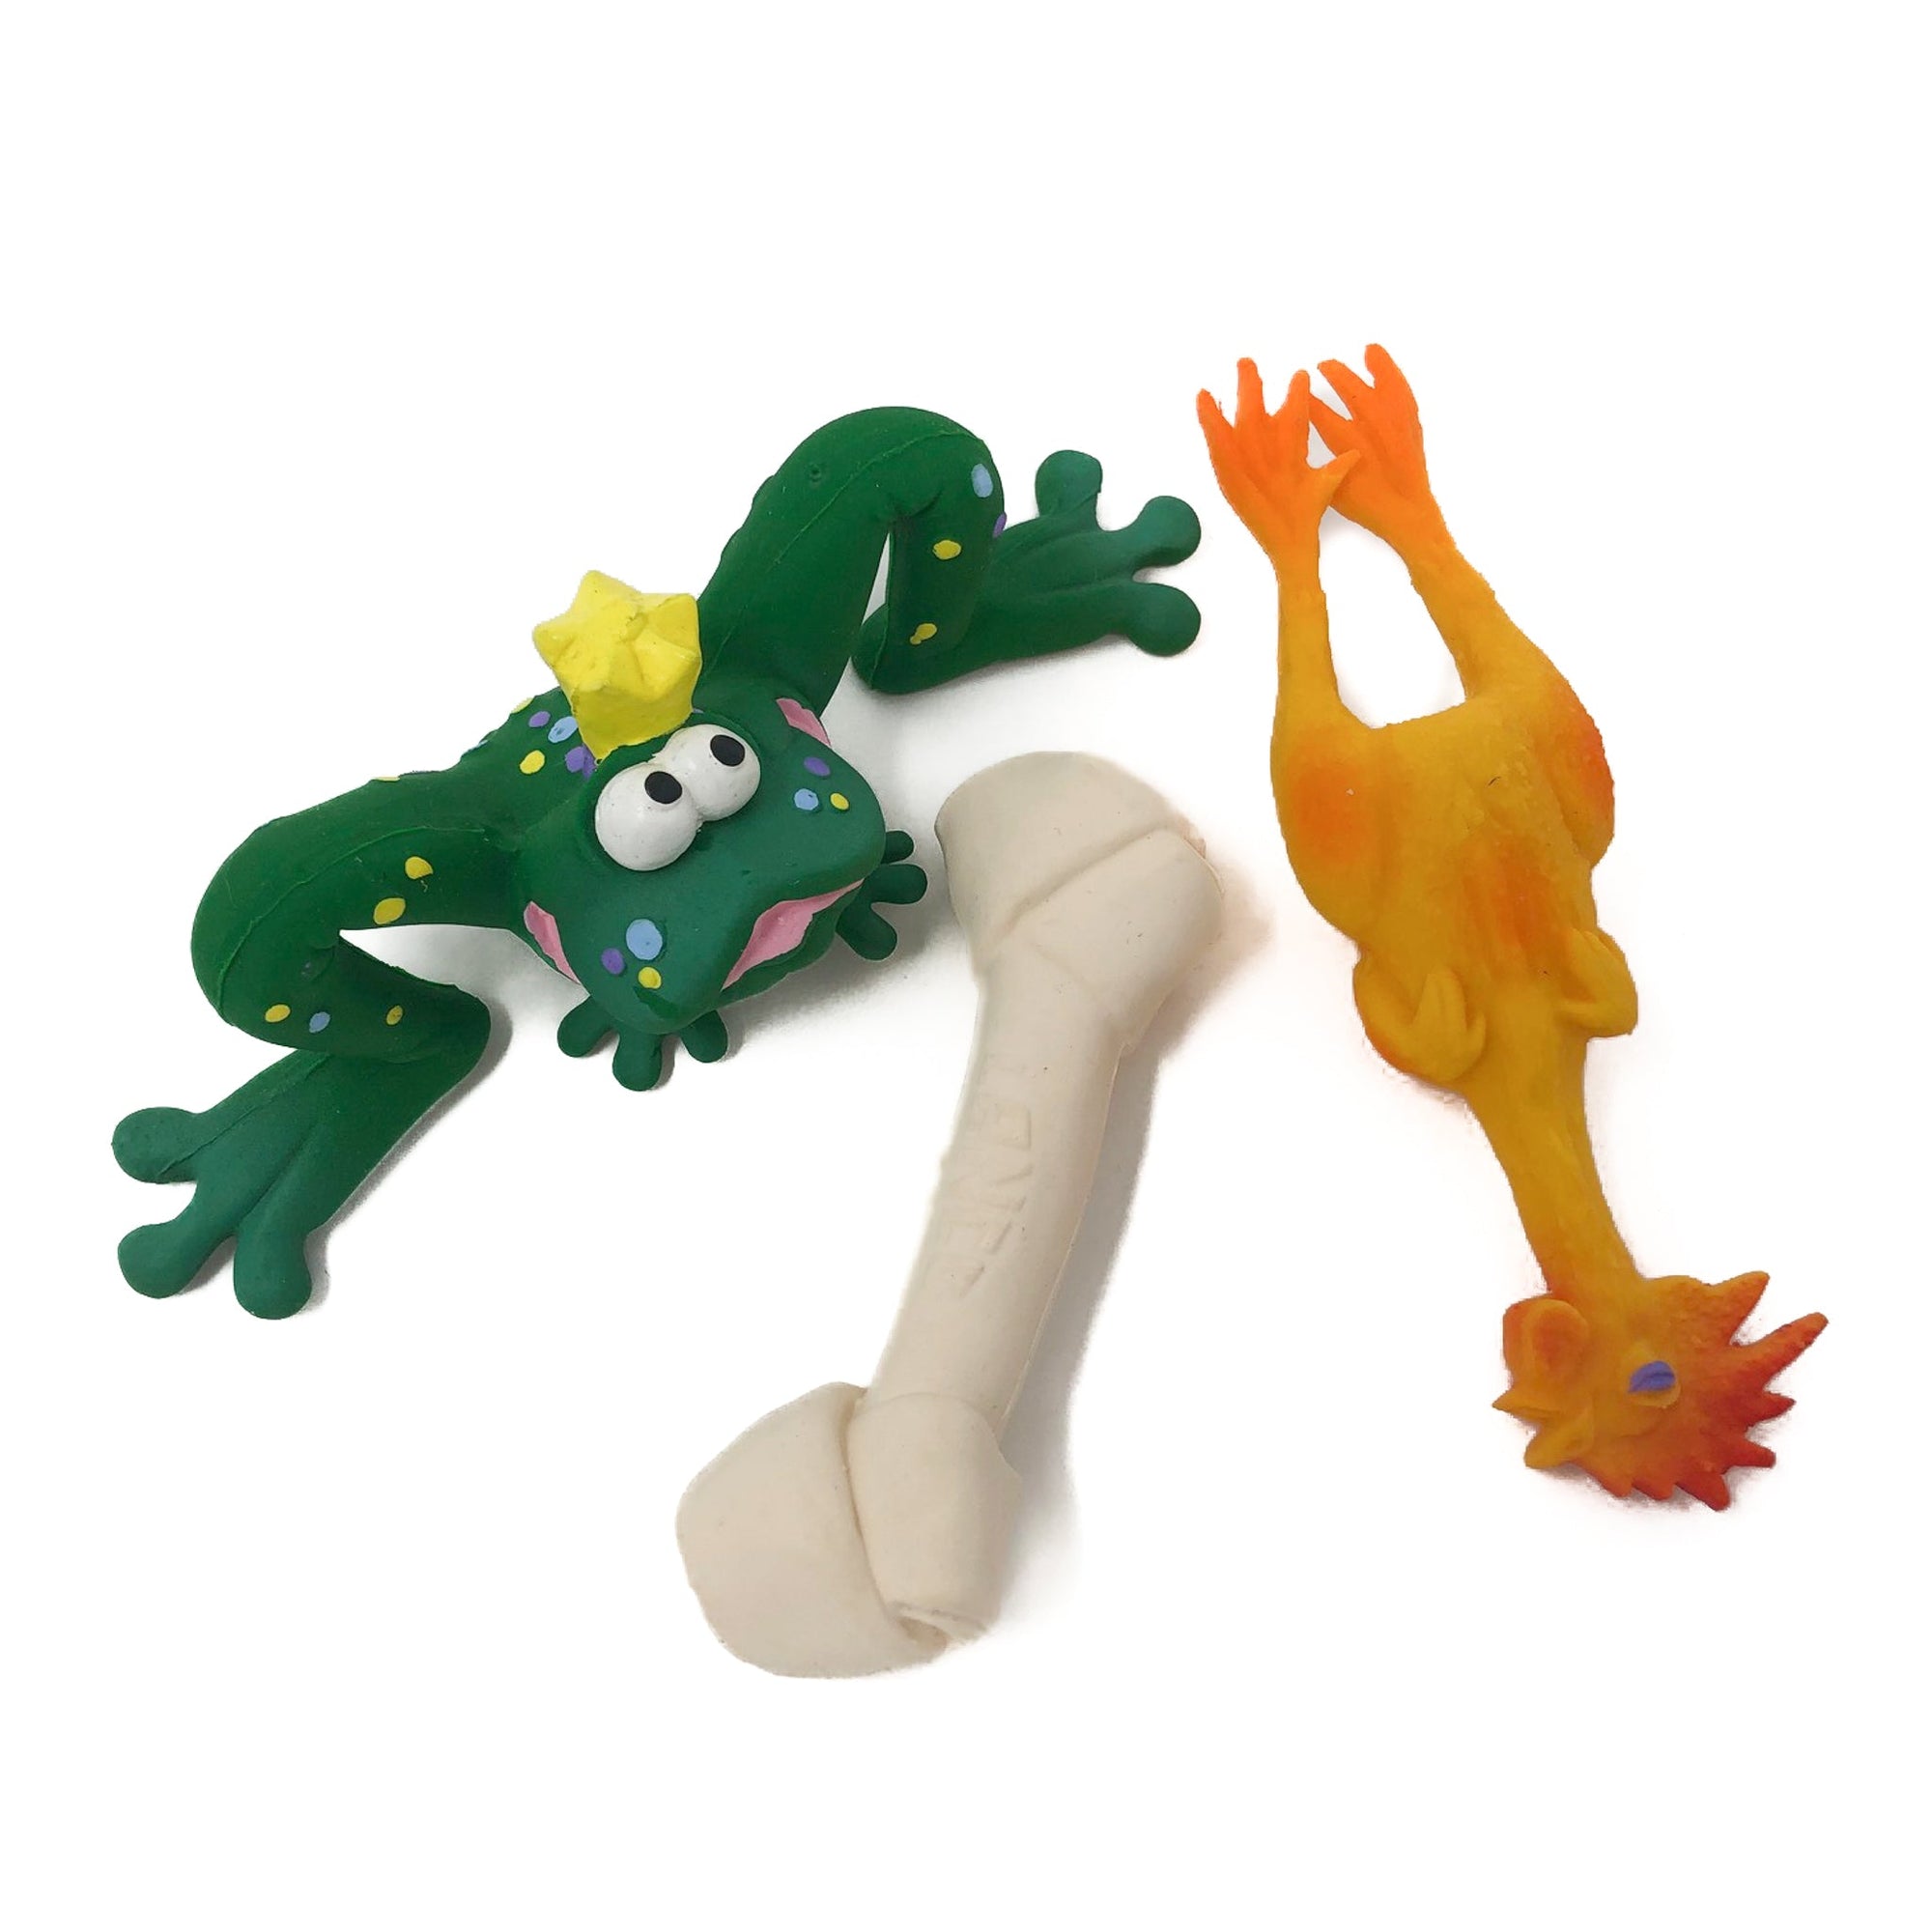 Rubber Teething Toys - Chicken, Bone & Frog Toys | Natural Rubber Toys